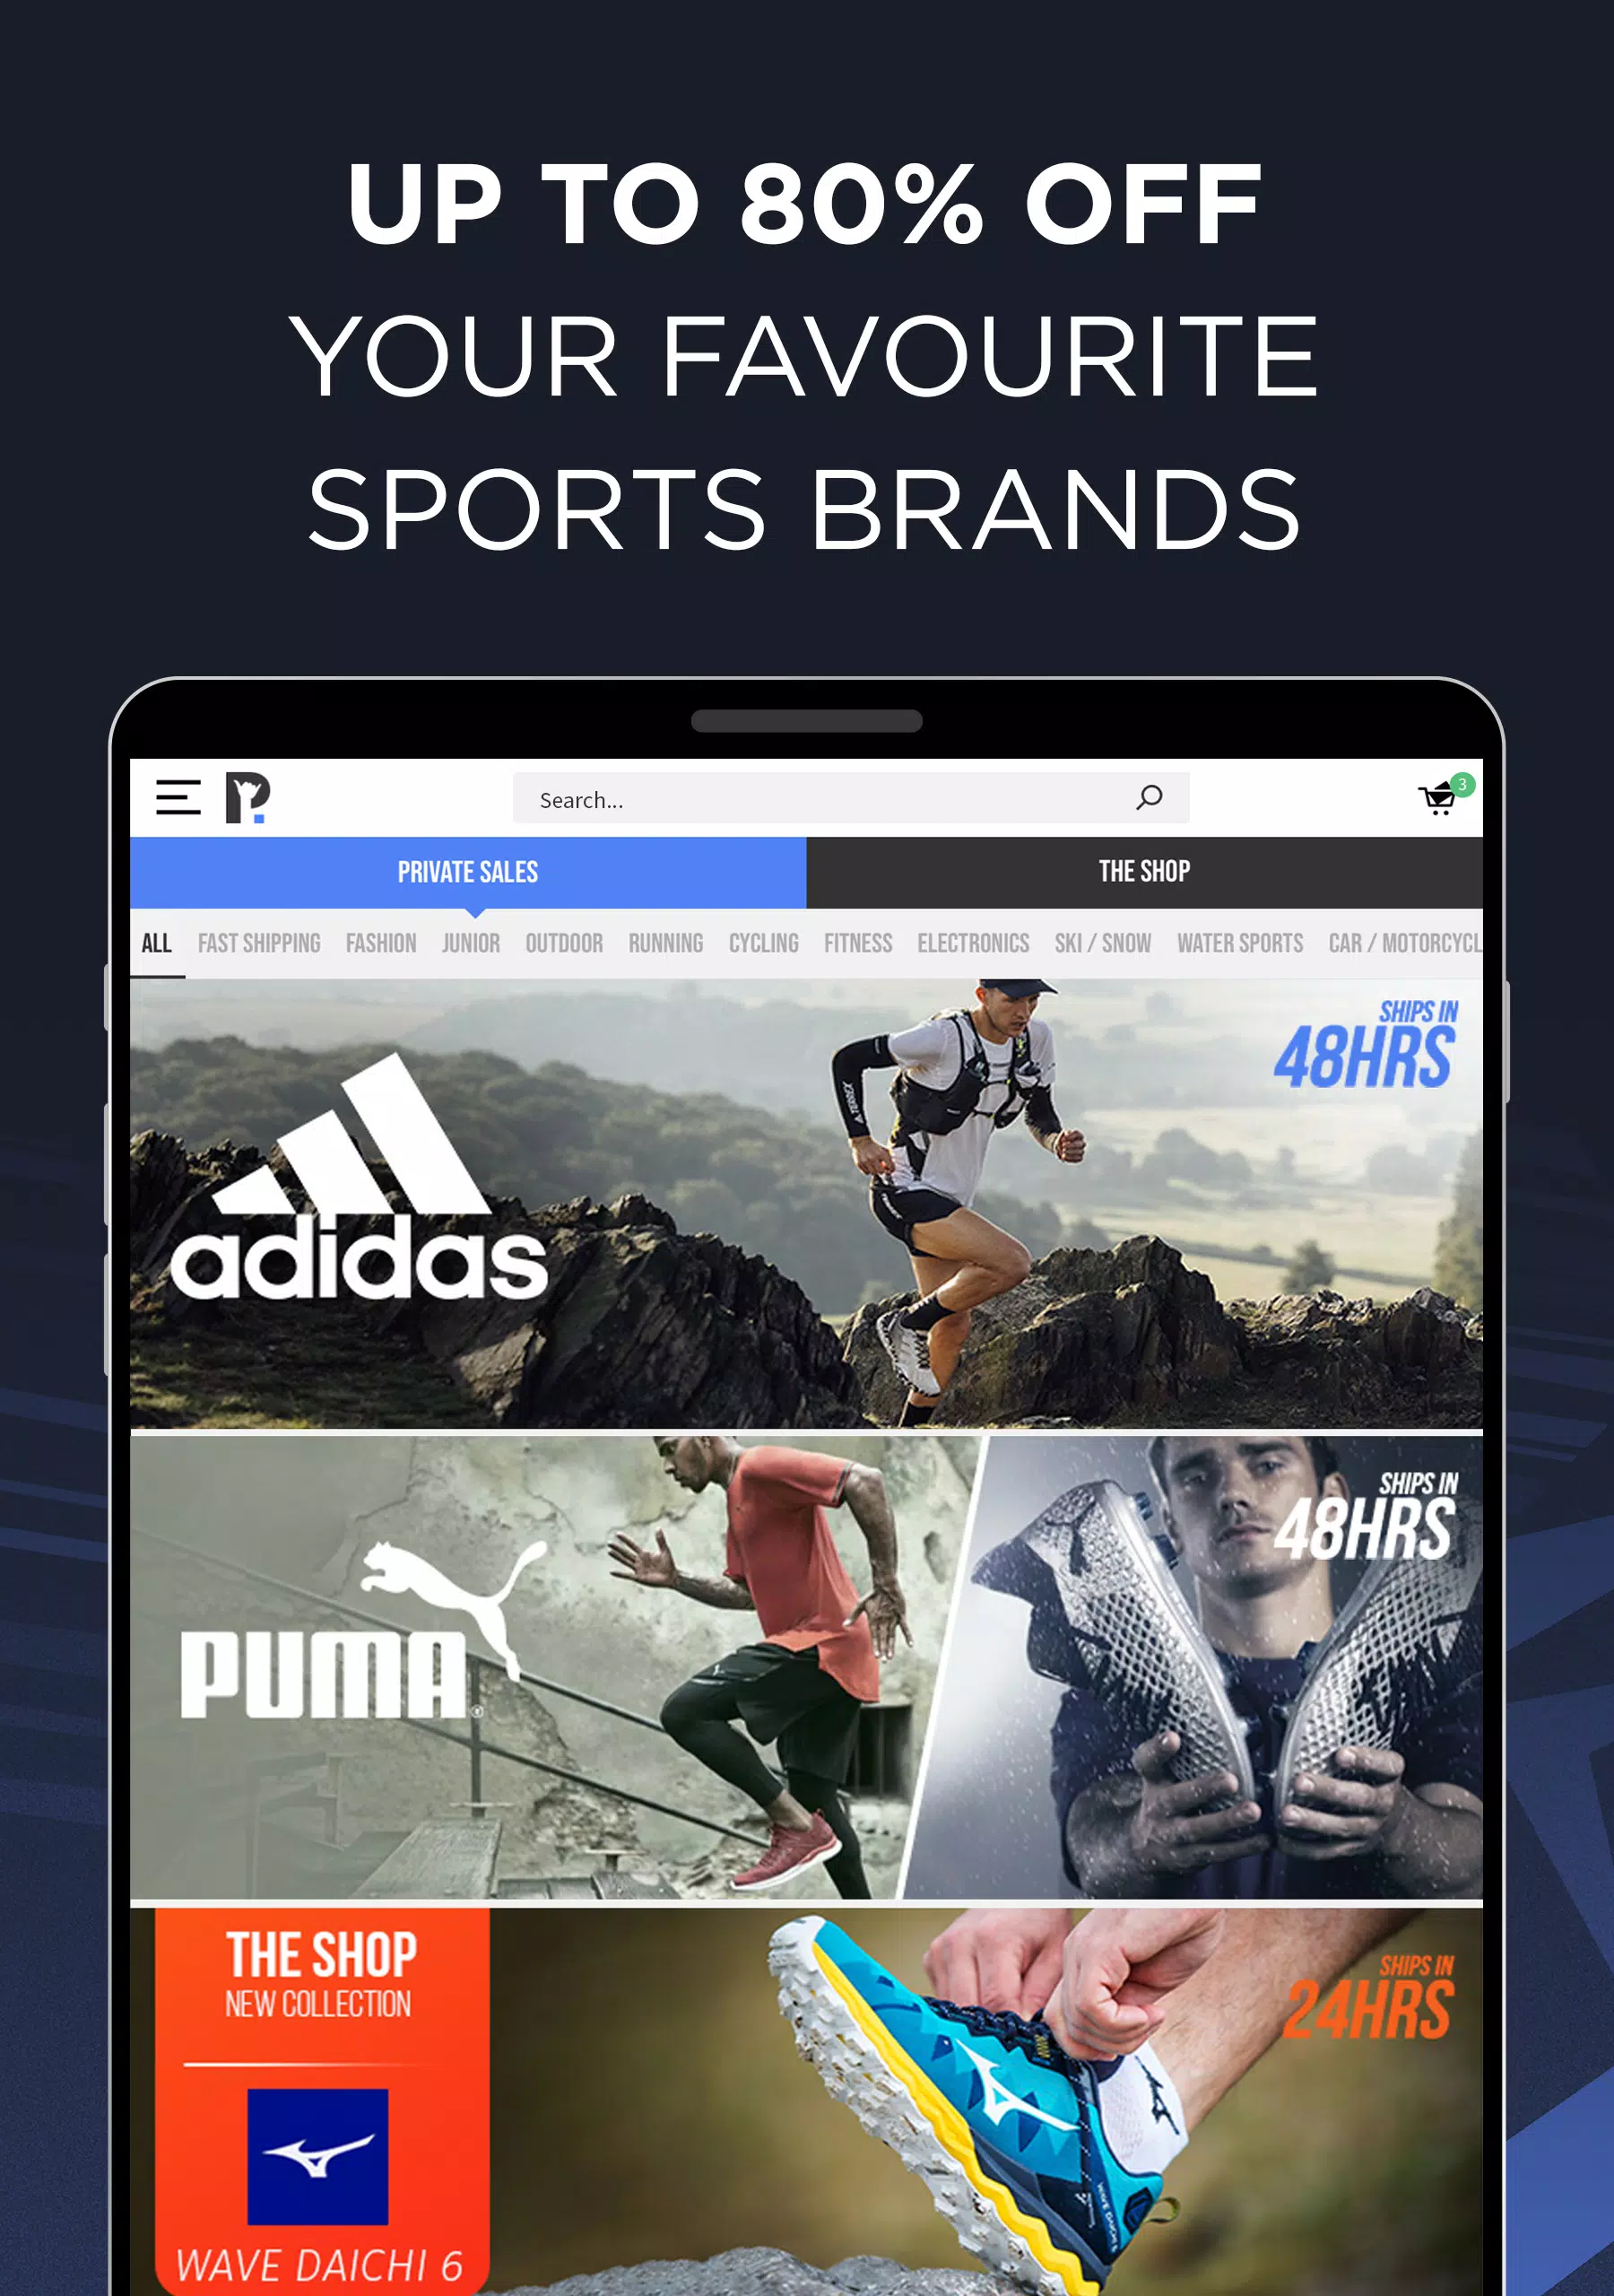 Private Sport Shop APK for Android Download